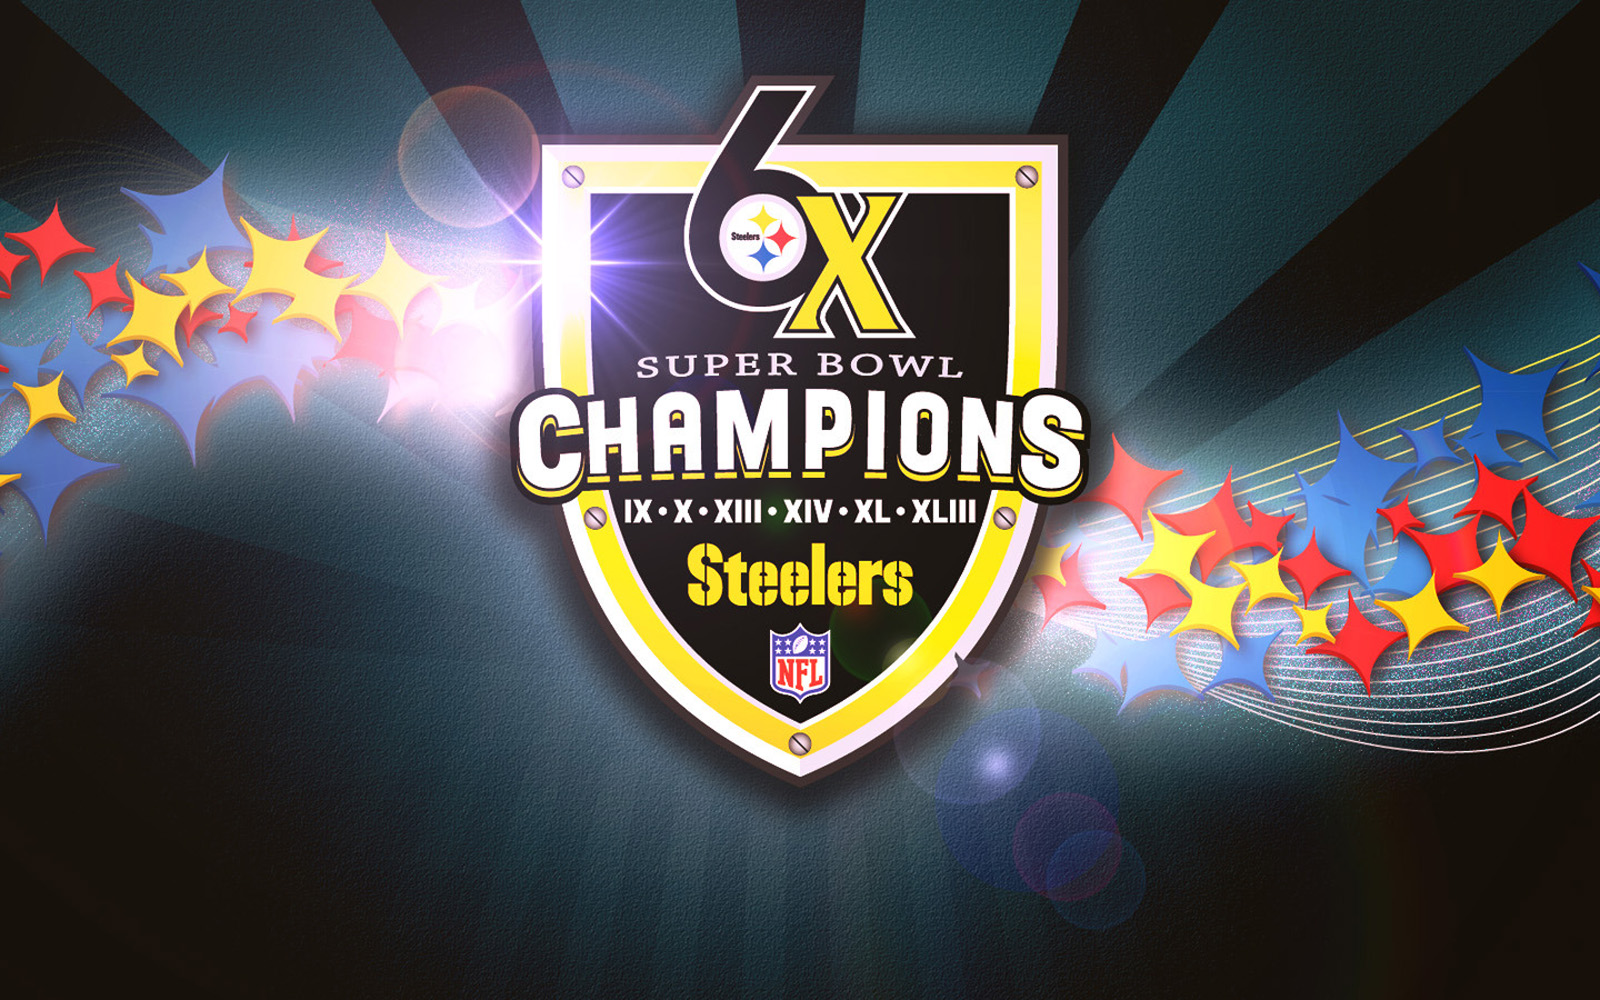 Steelers Screensavers And Wallpaper On